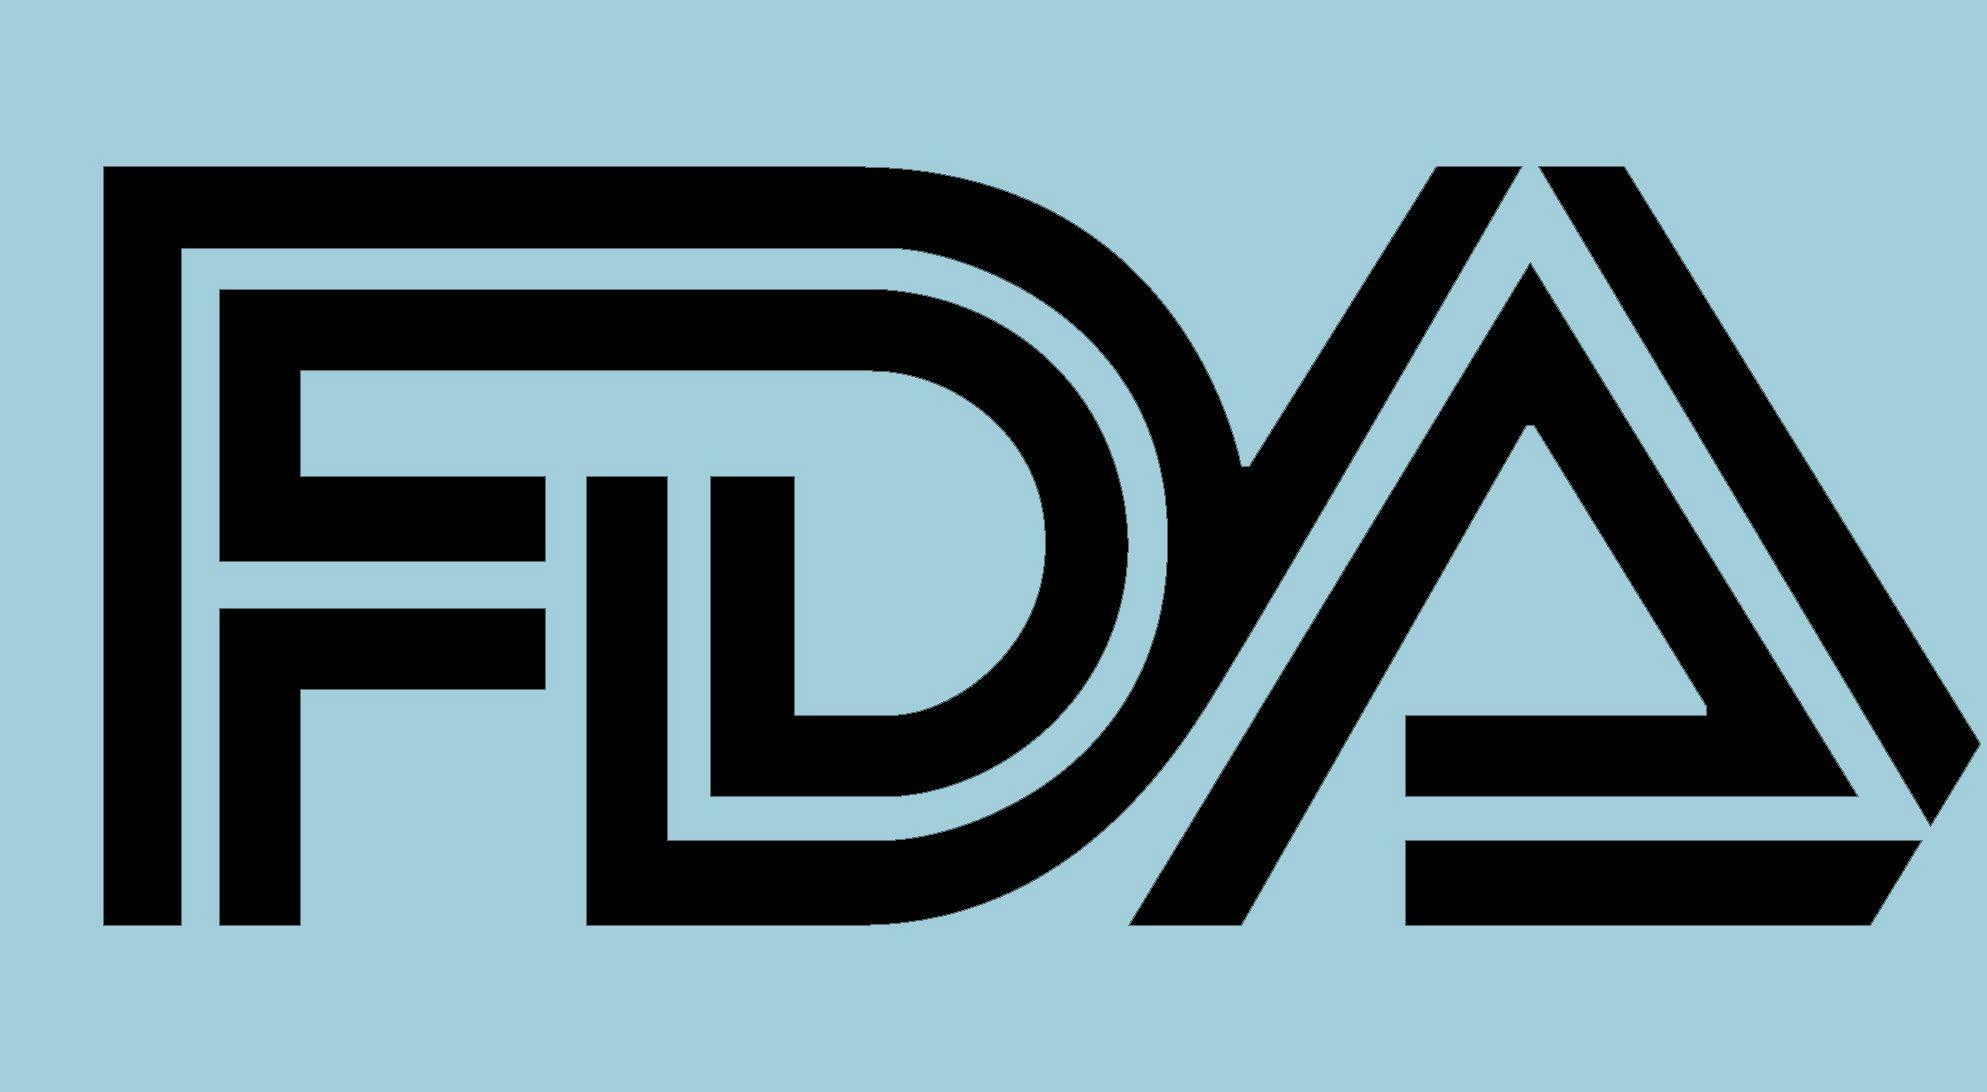 Committee Supports FDA Approval of CT-P10 for Non-Hodgkin Lymphoma Treatment